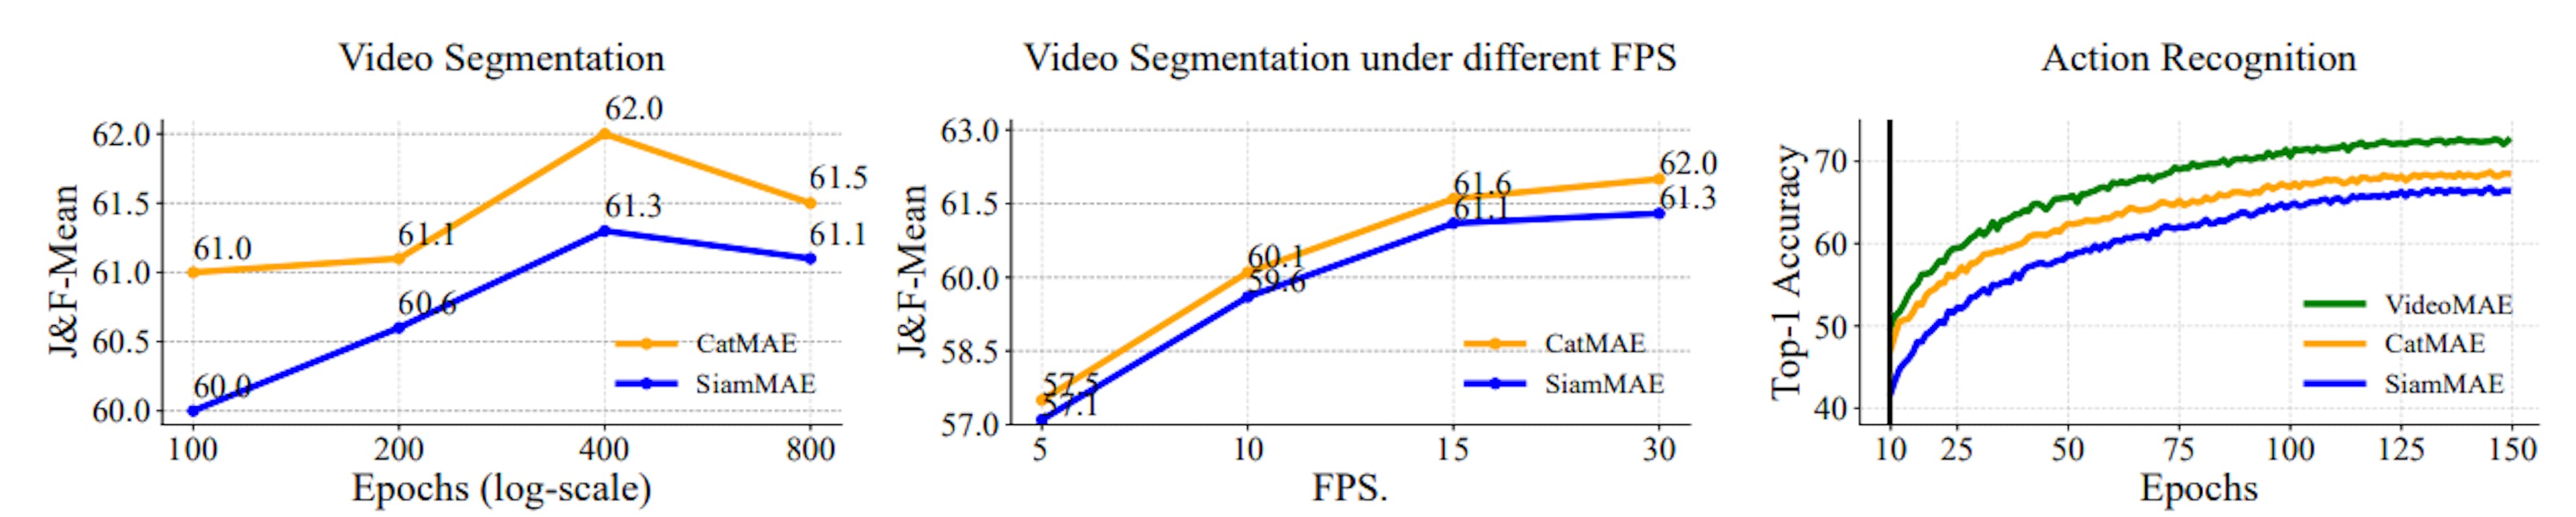 Fig. 3: Impact of pretraining epochs and propagation FPS on video segmentation. Comparison of Top-1 accuracy forVideoMAE, CatMAE, and SiamMAE under different fine-tuning epochs.